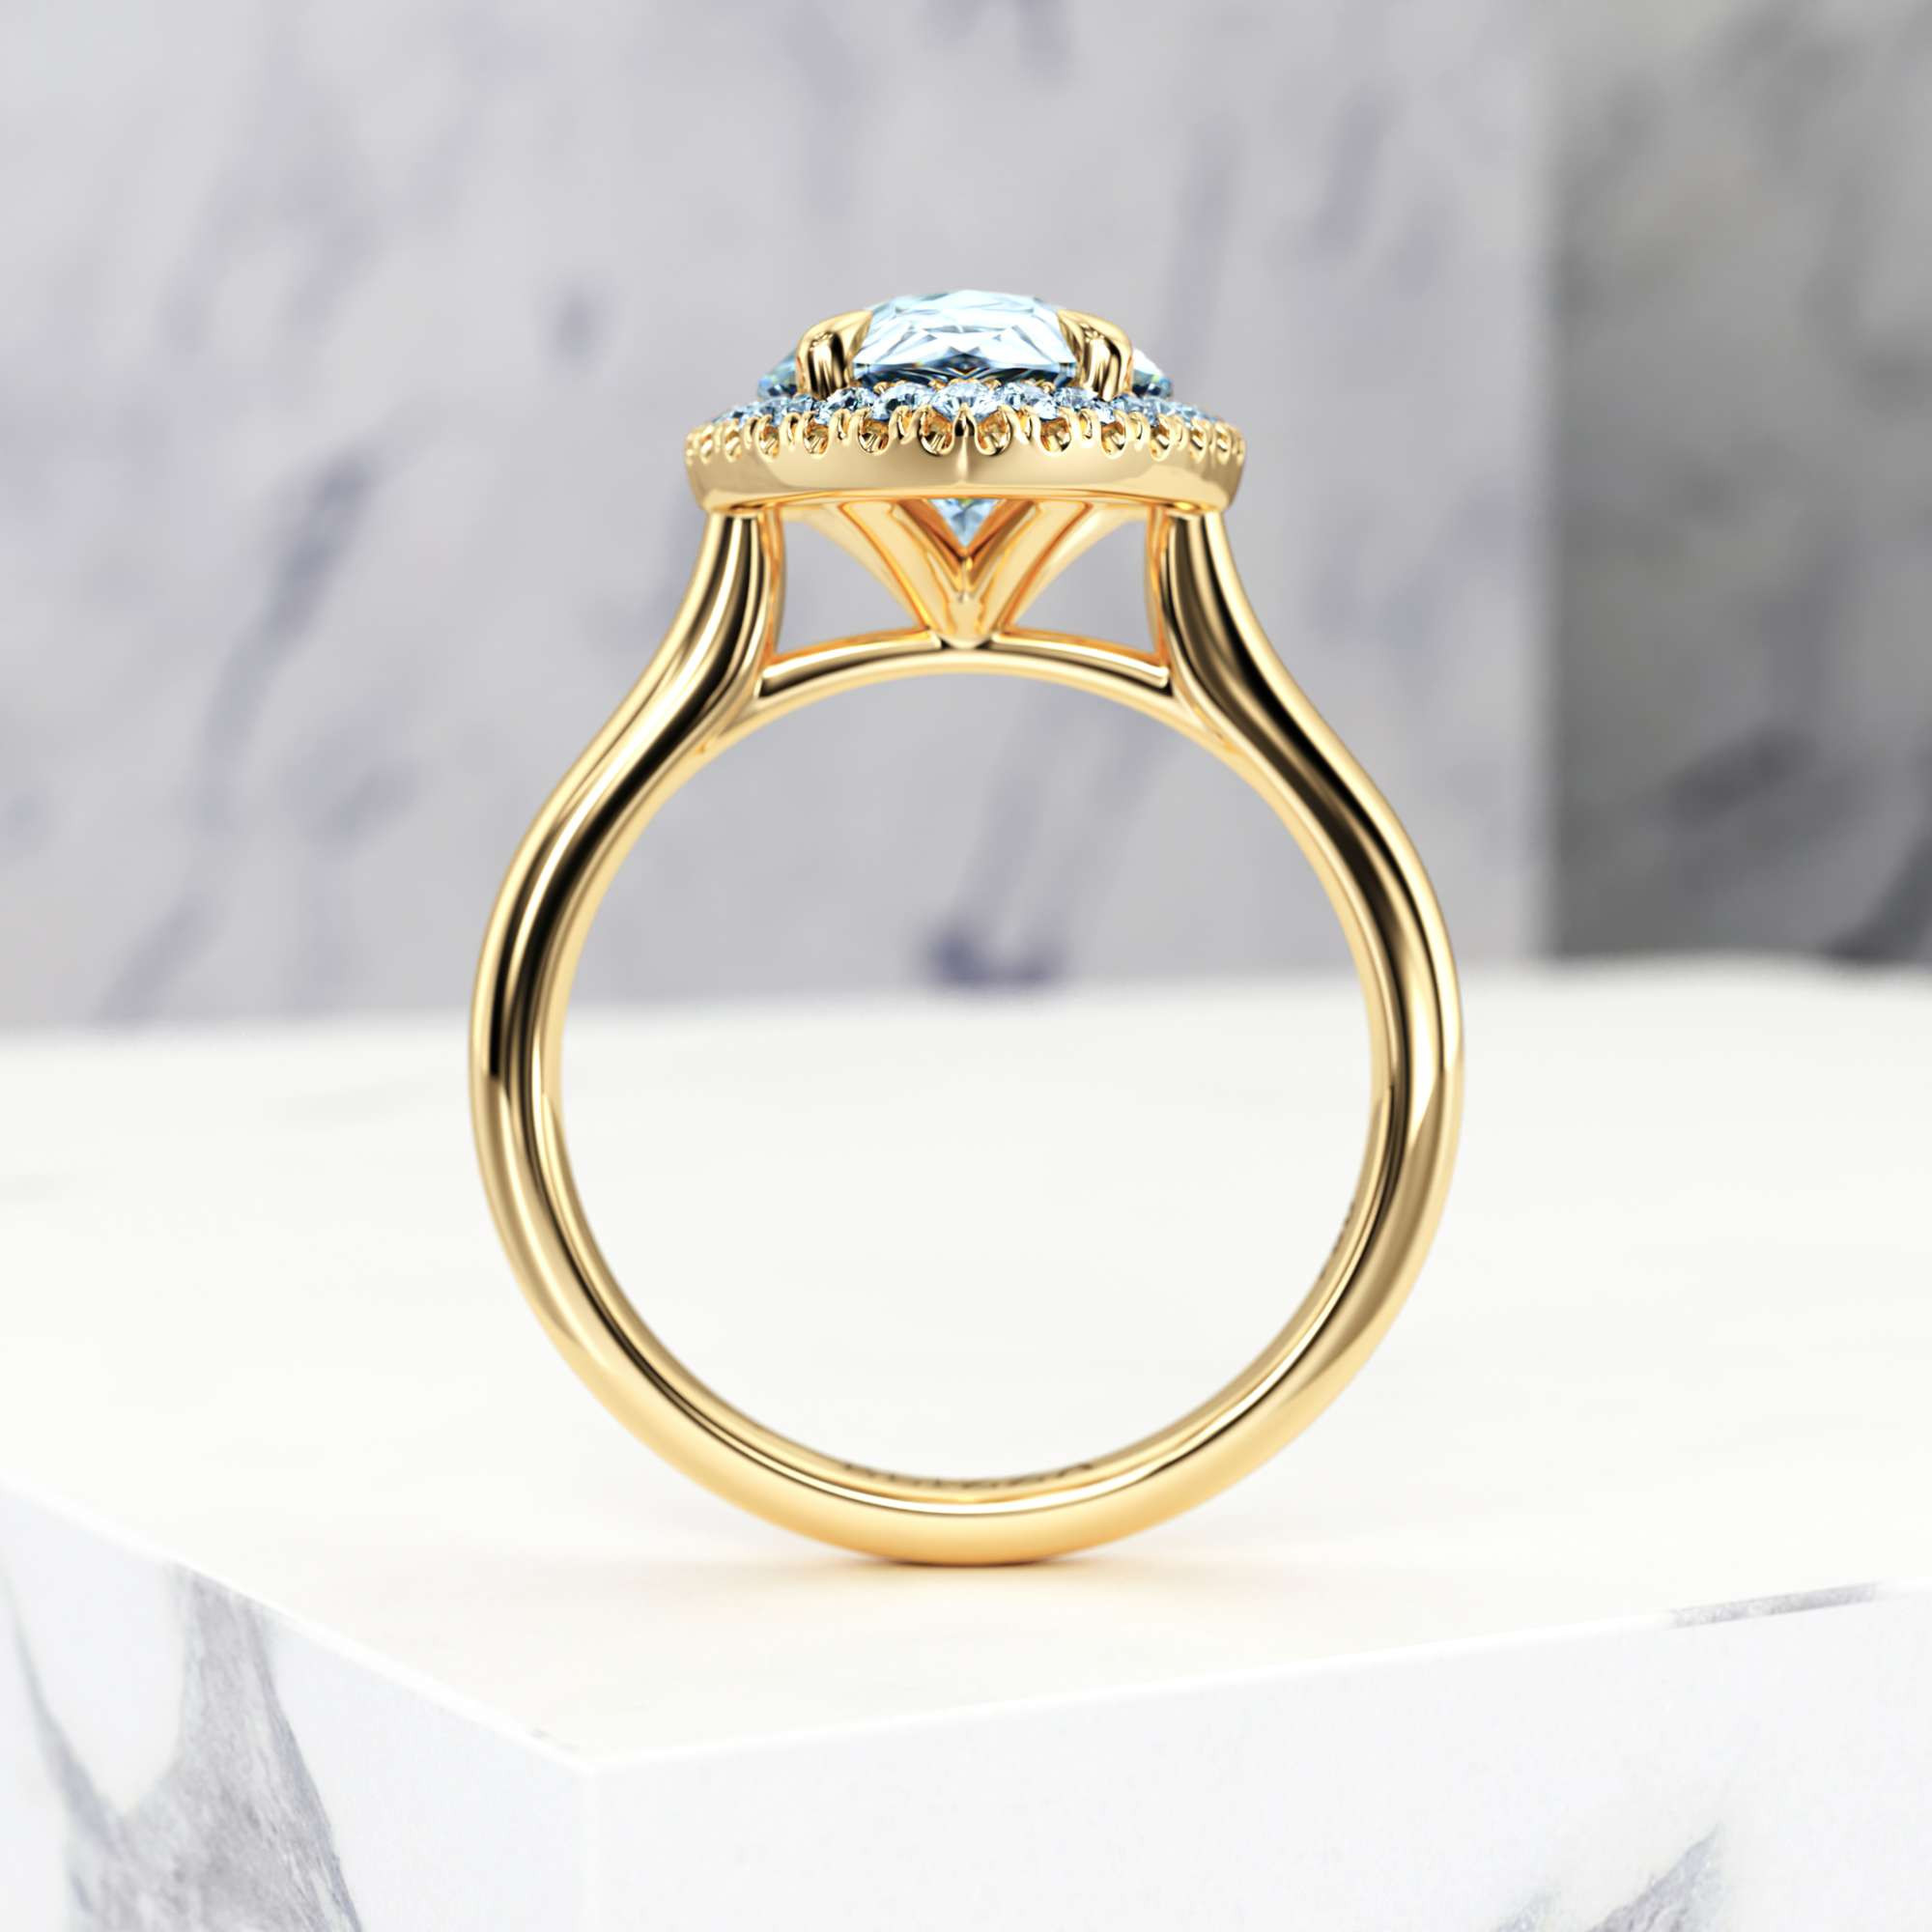 Verlobungsring Effie Pear | Pear | 14K Gelbgold | Natural | GIA Certified | 0.30ct SI1 H 6